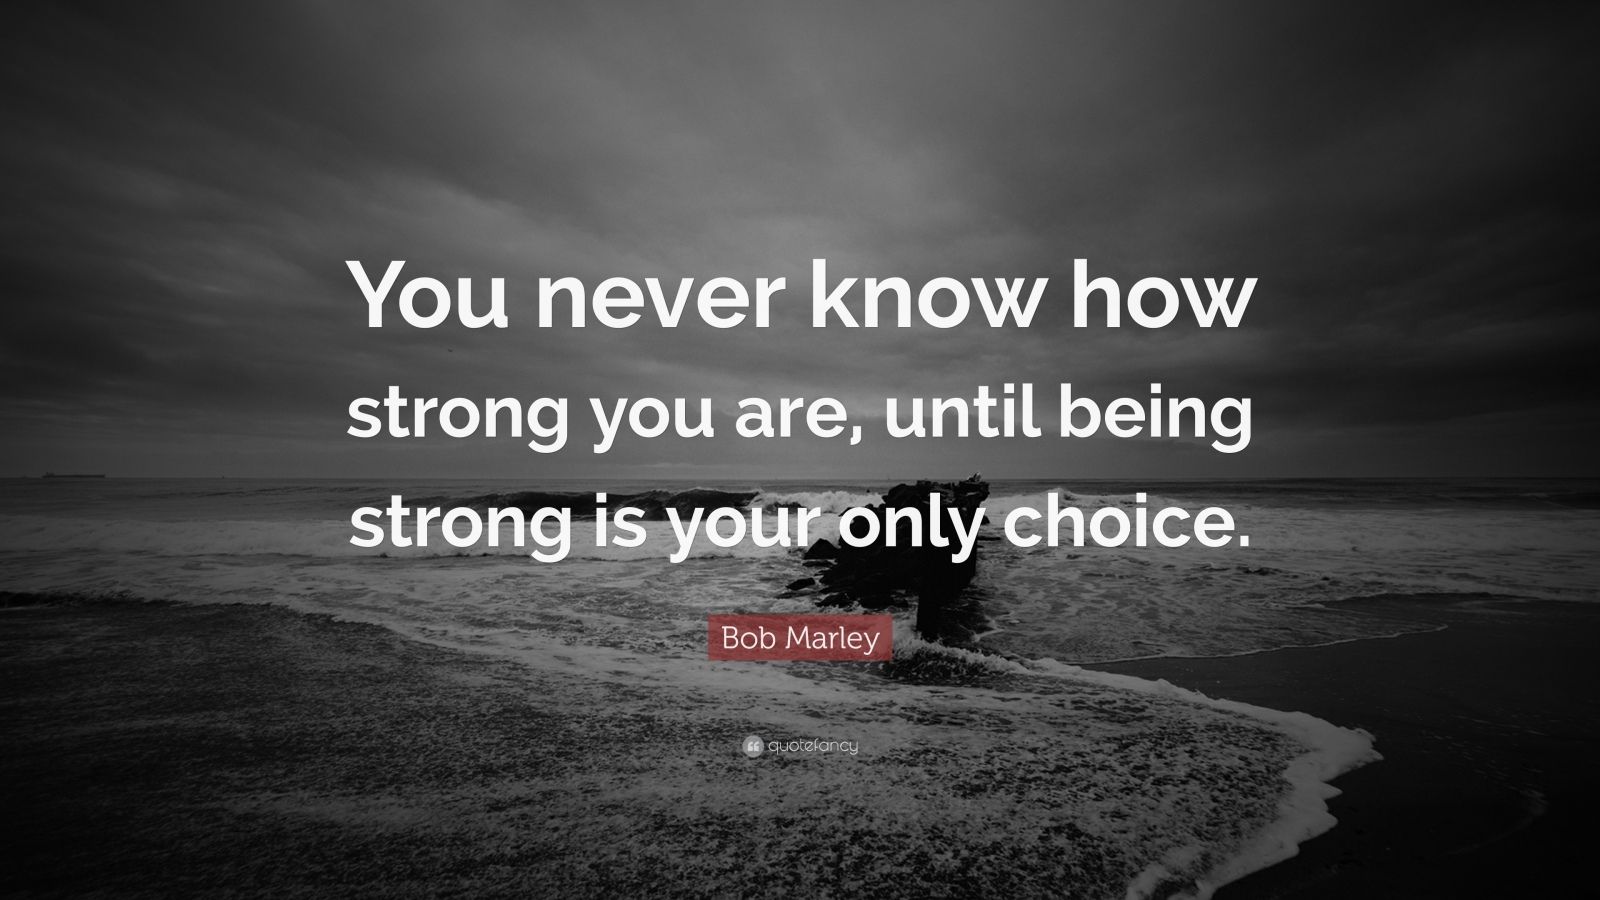 Bob Marley Quote: “You never know how strong you are, until being